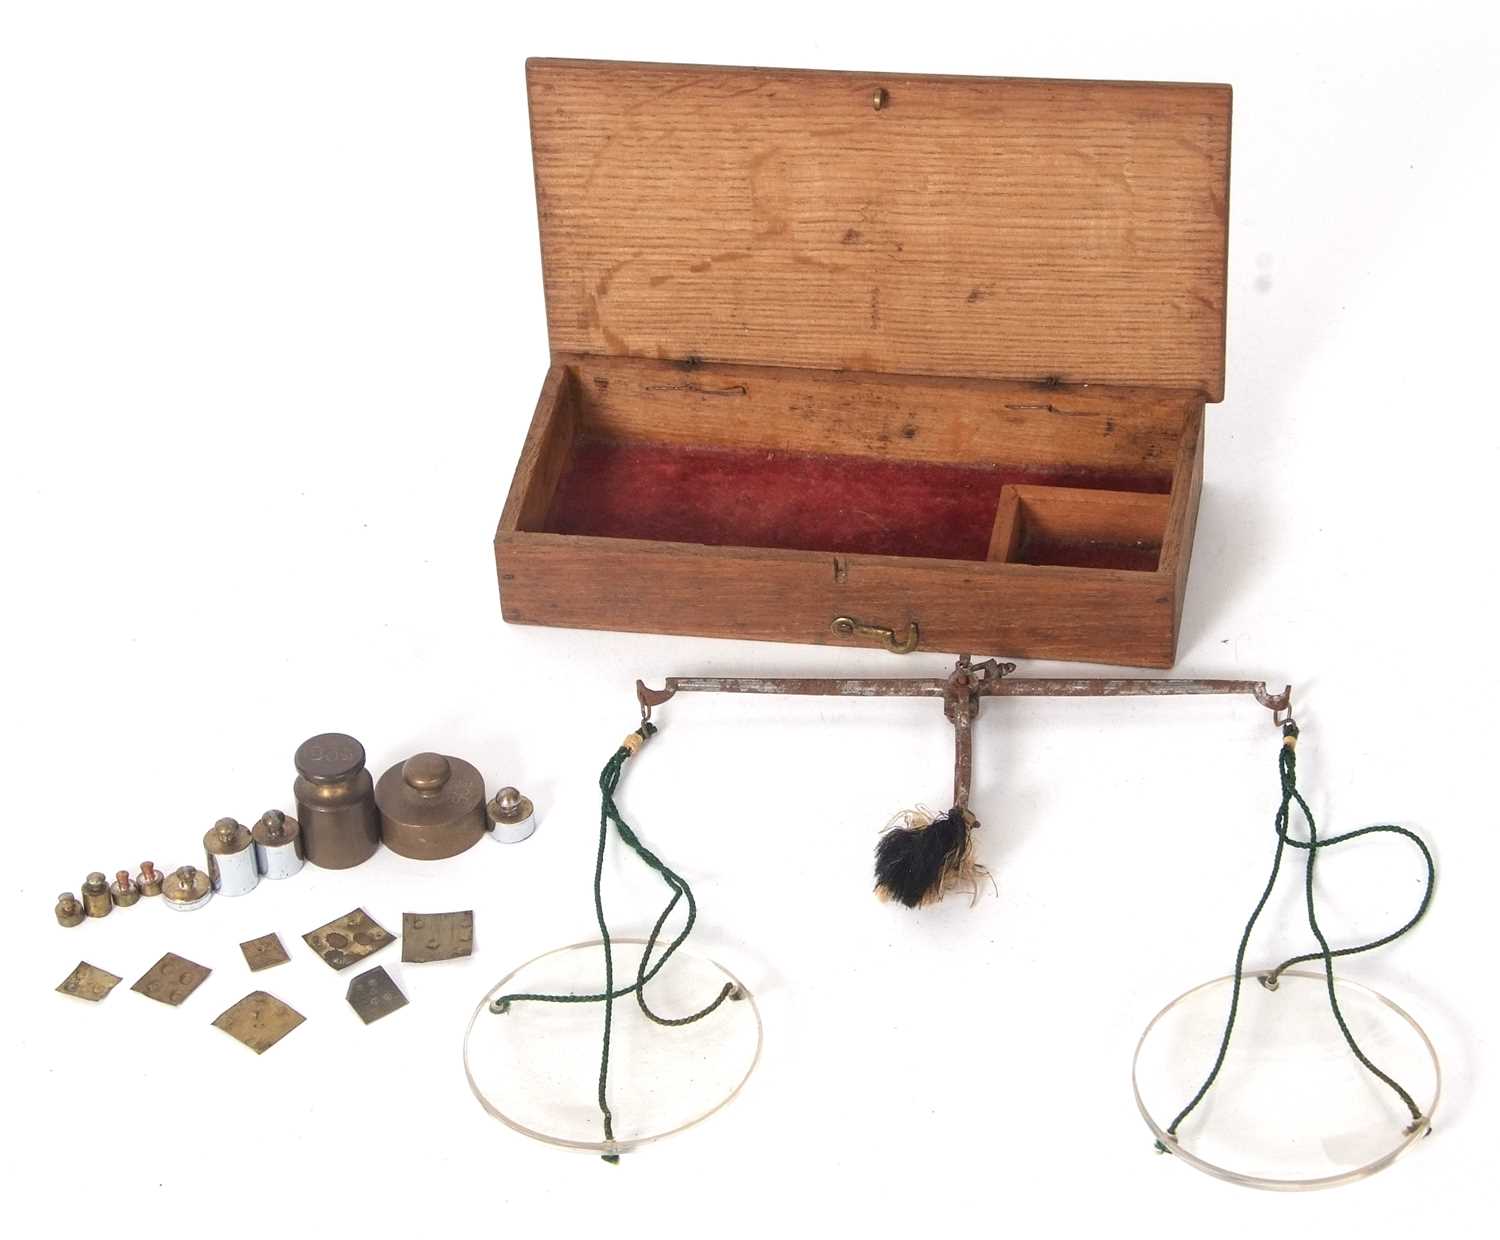 Box set of apothecary scales with glass pans, strings and weights and balance beams